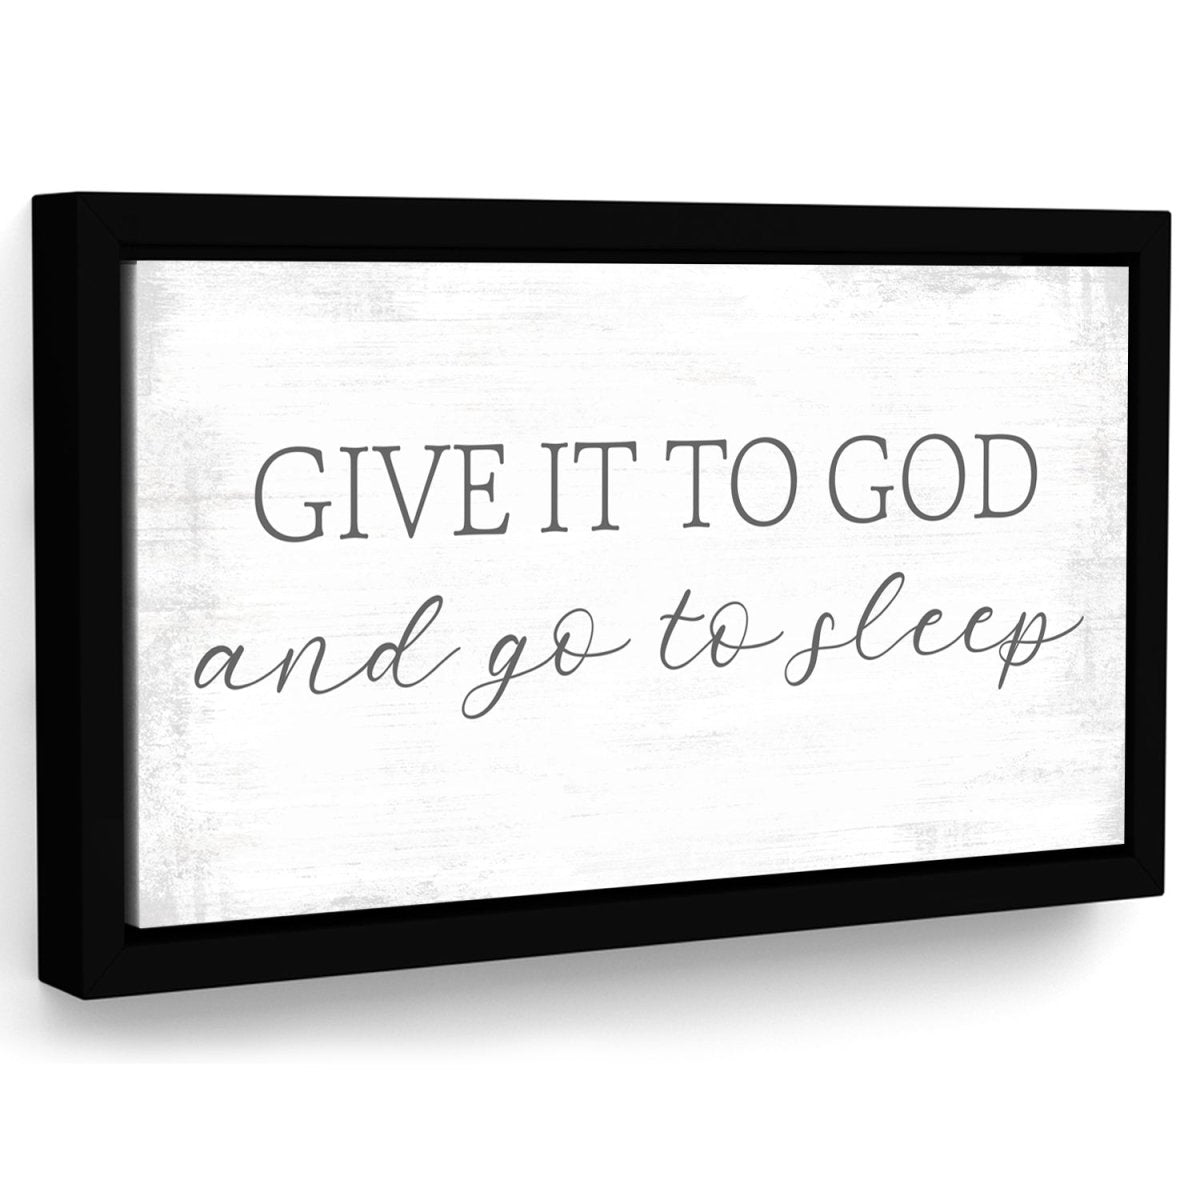 Give It To God and Go To Sleep Sign - Pretty Perfect Studio